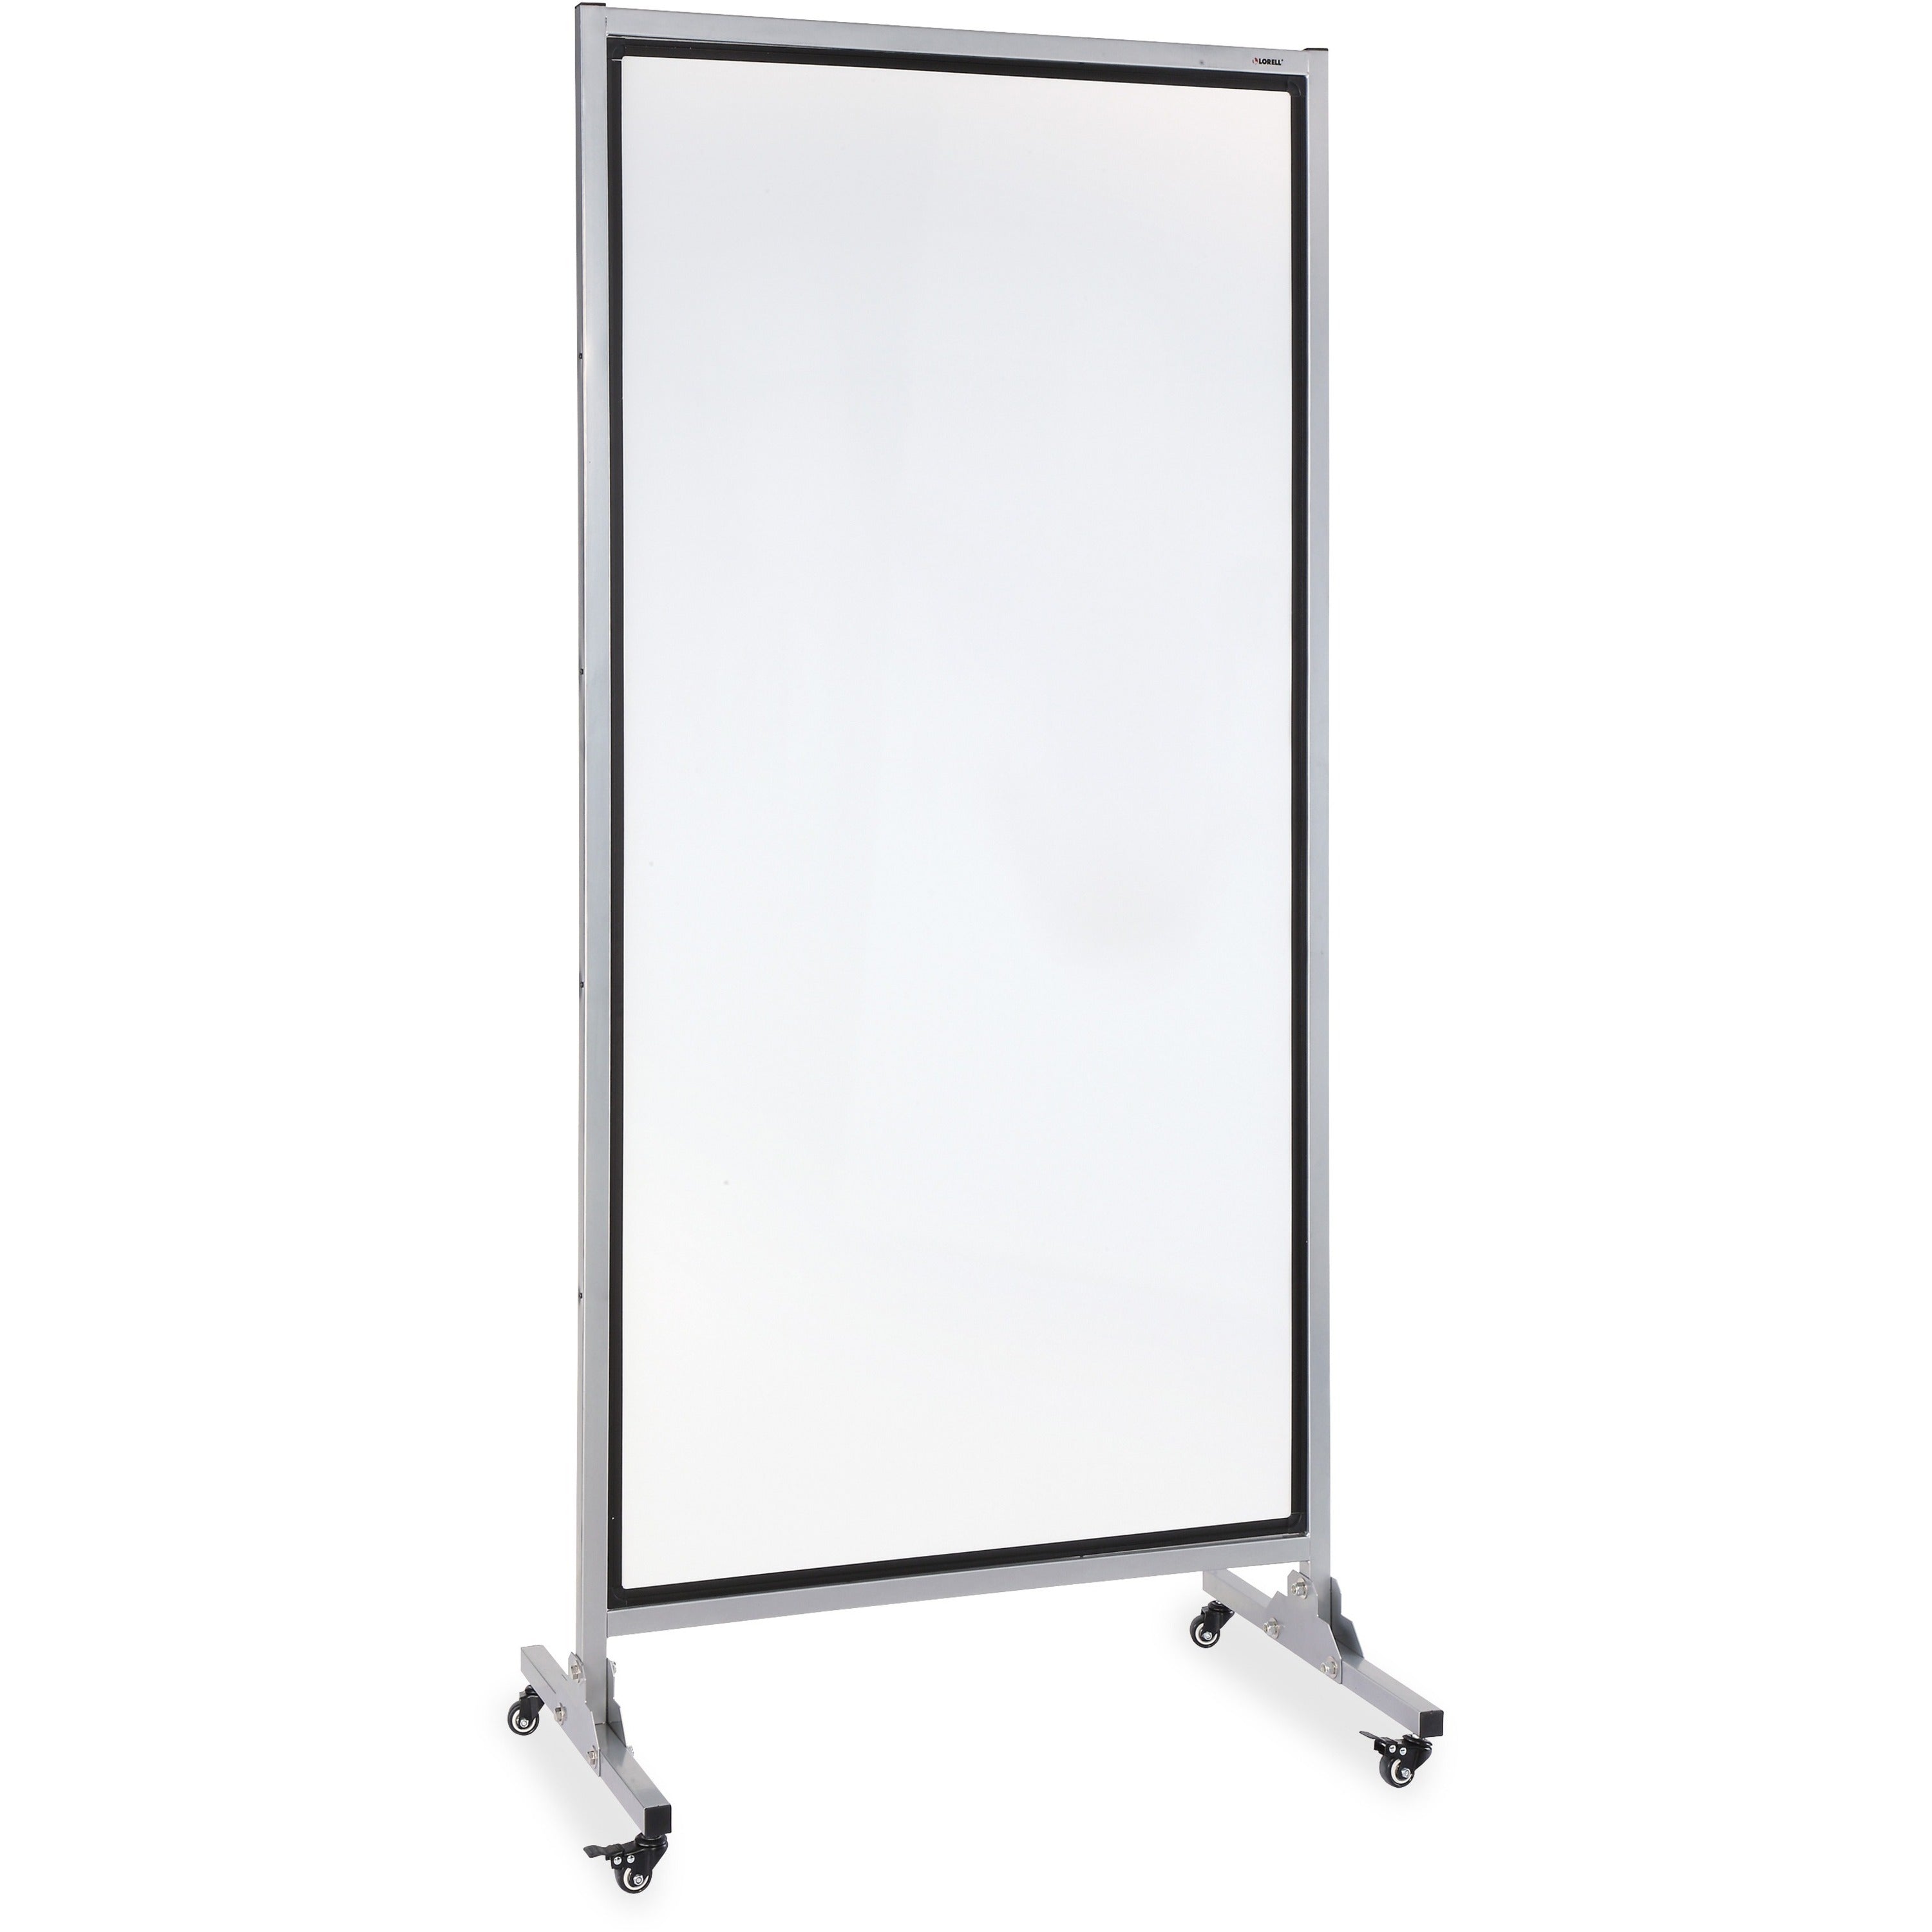 Lorell Double-sided Dry-Erase Easel/Room Divider - 37.5" (3.1 ft) Width x 82.5" (6.9 ft) Height - White Steel Surface - Black Aluminum Frame - Rectangle - Magnetic - 1 Each - 